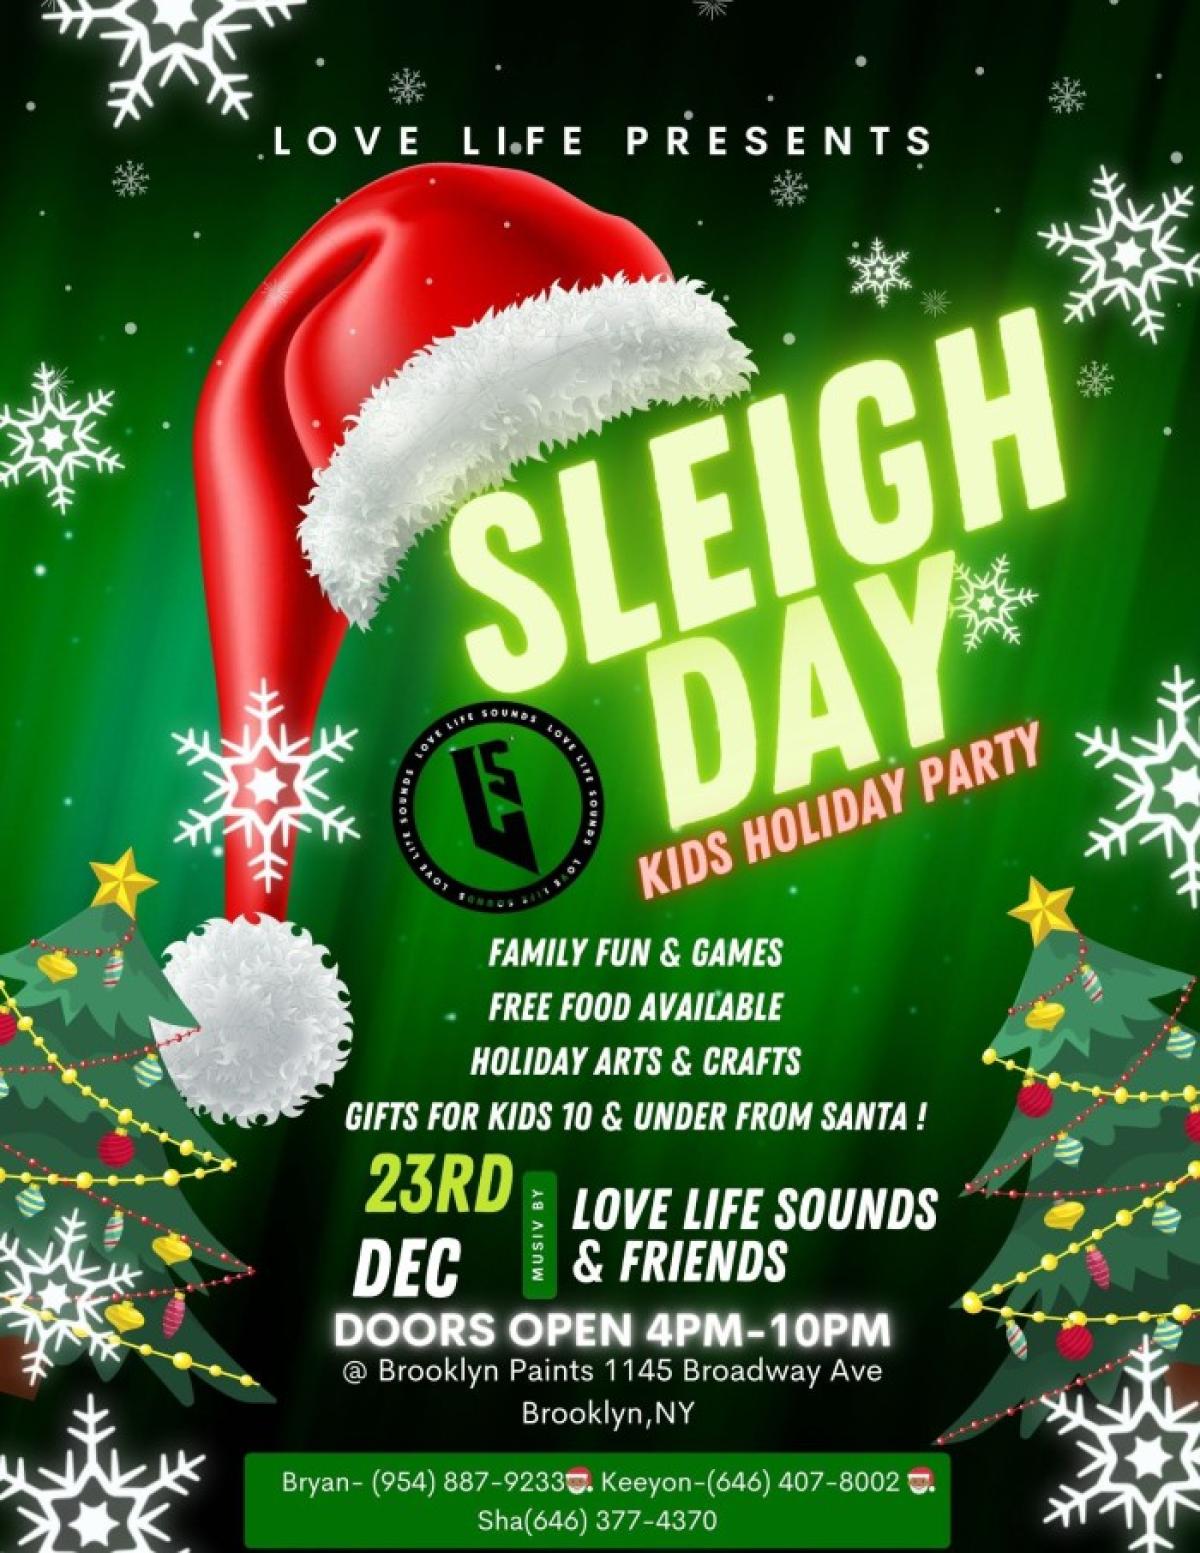 SleighDay - Kids Holiday Party flyer or graphic.